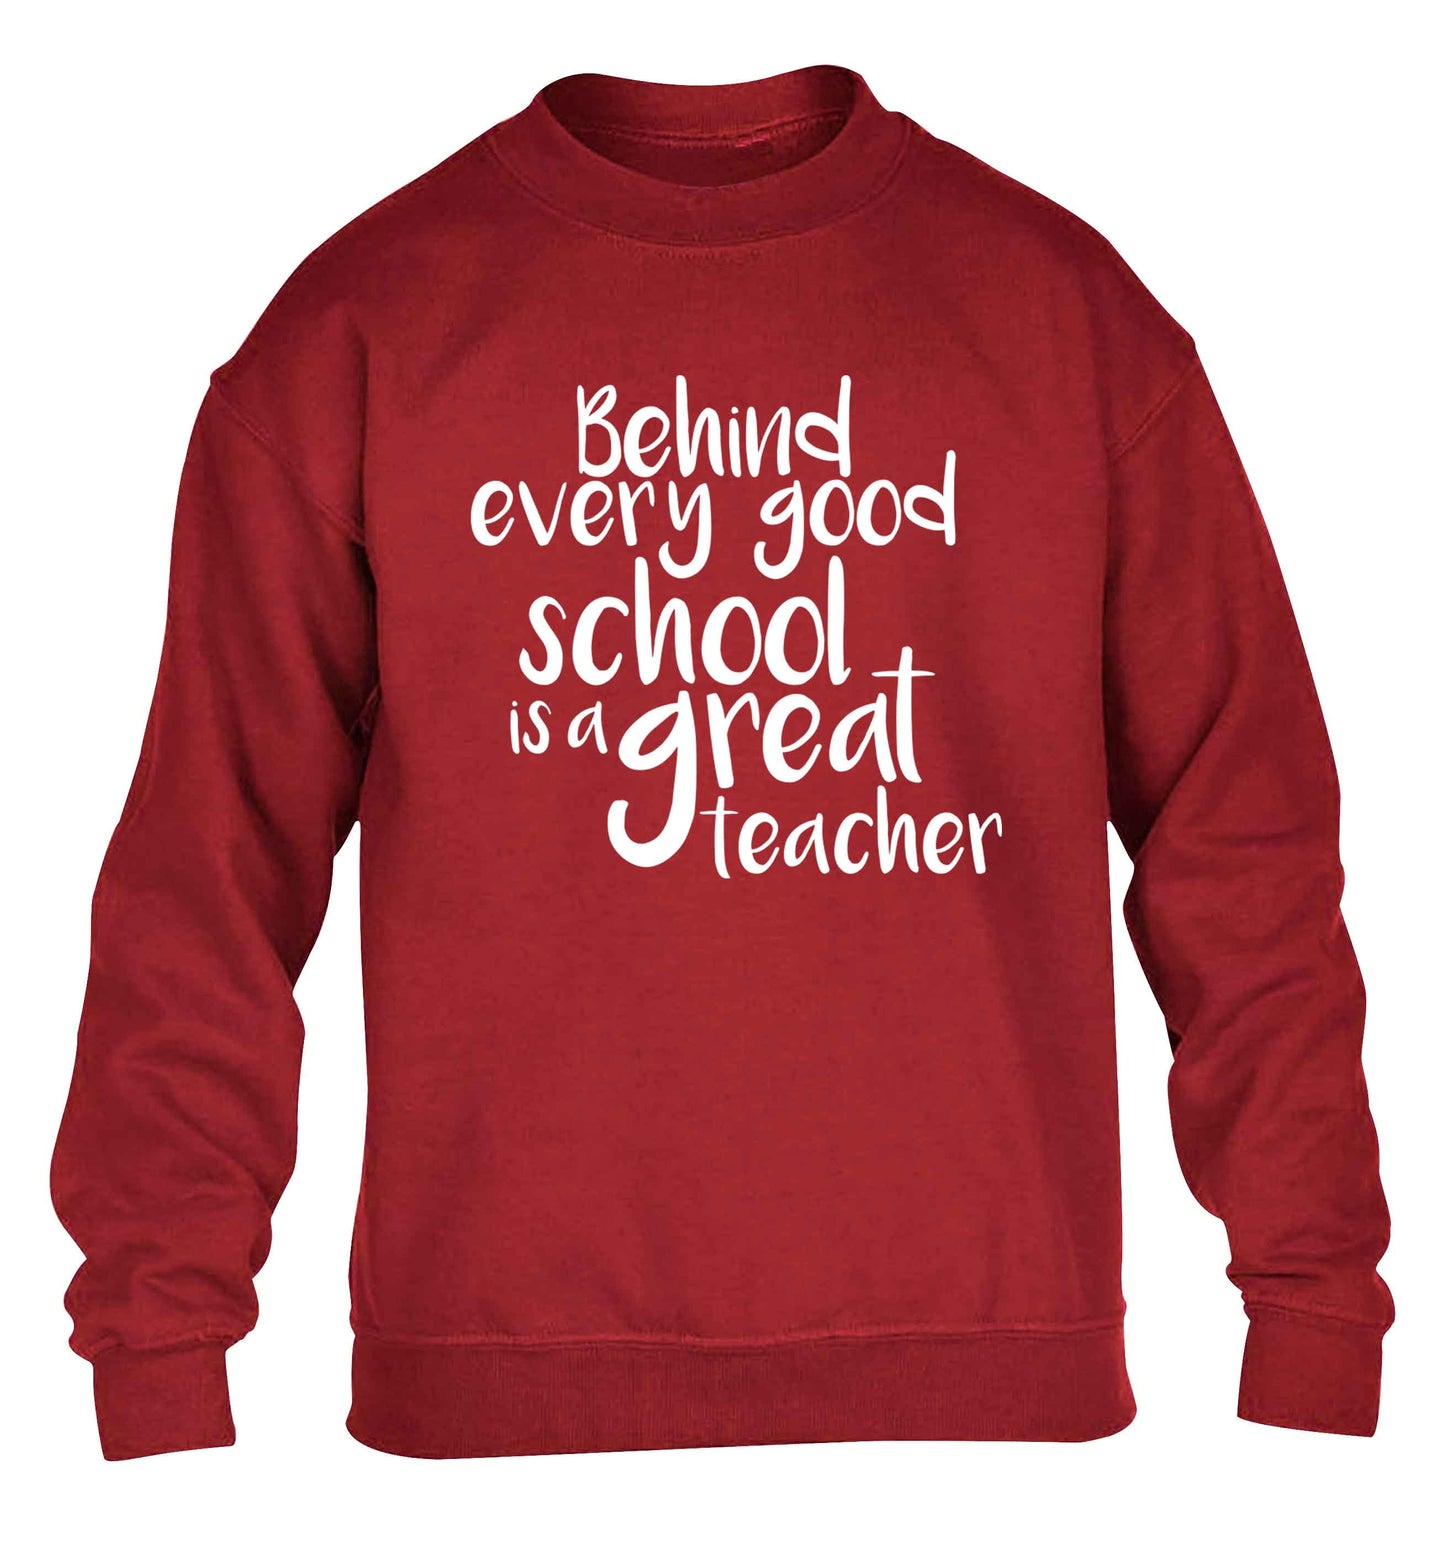 Behind every good school is a great teacher children's grey sweater 12-13 Years